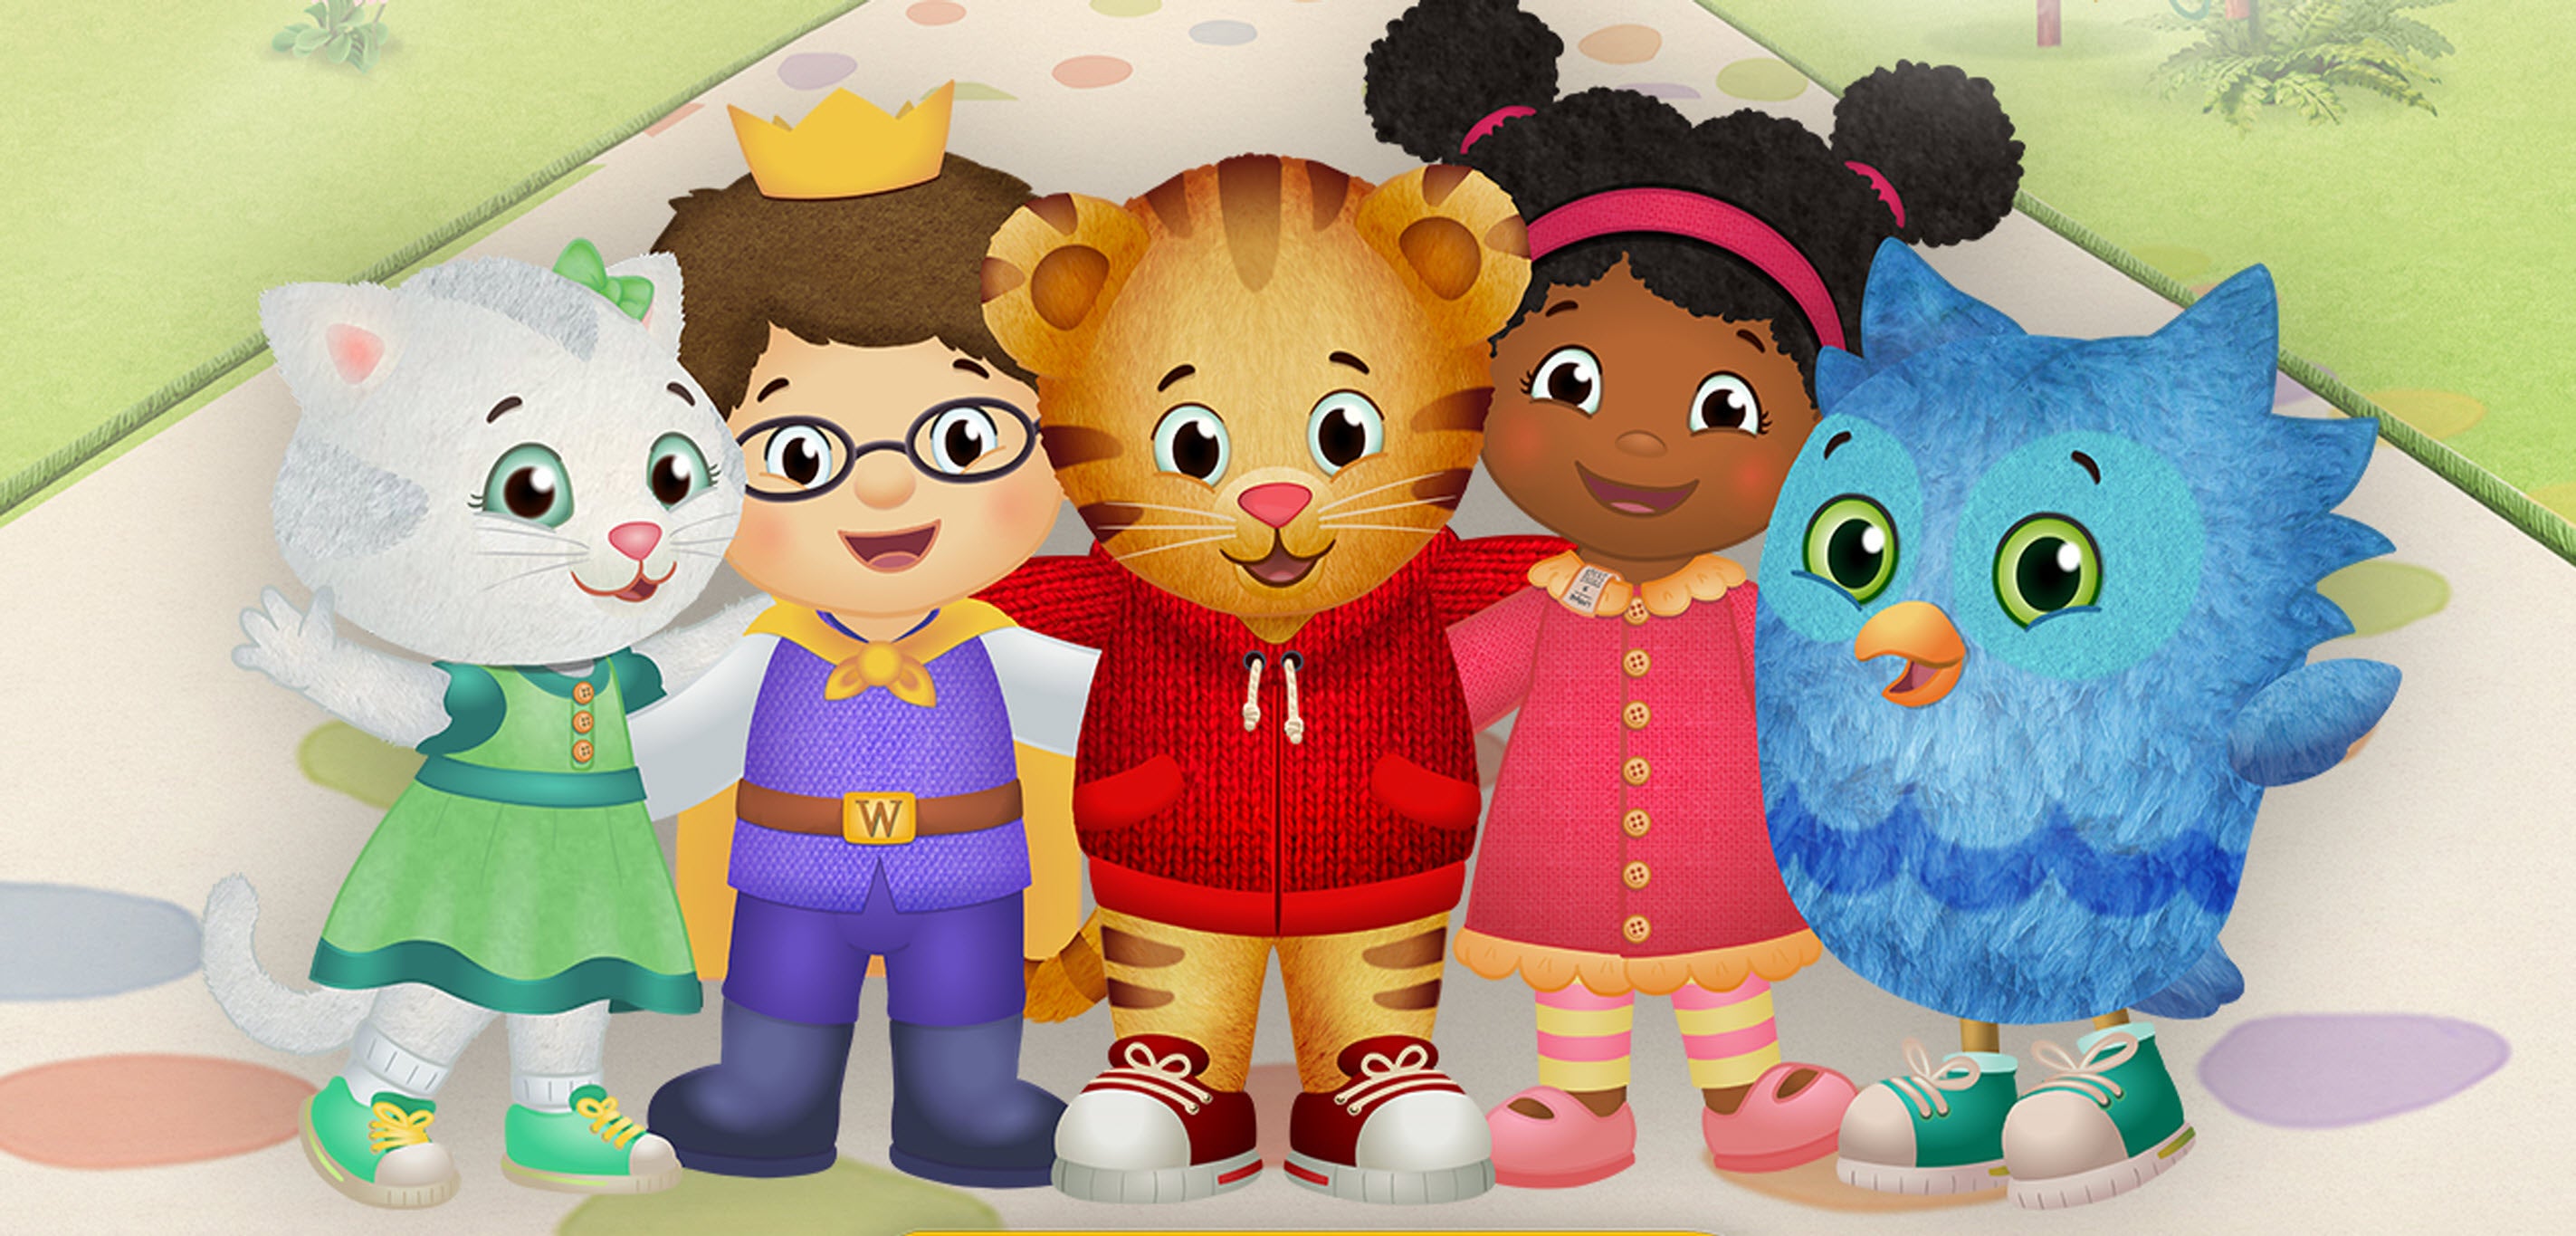 Daniel Tiger's Neighborhood Live! - King For A Day in Seattle promo photo for PBS presale offer code